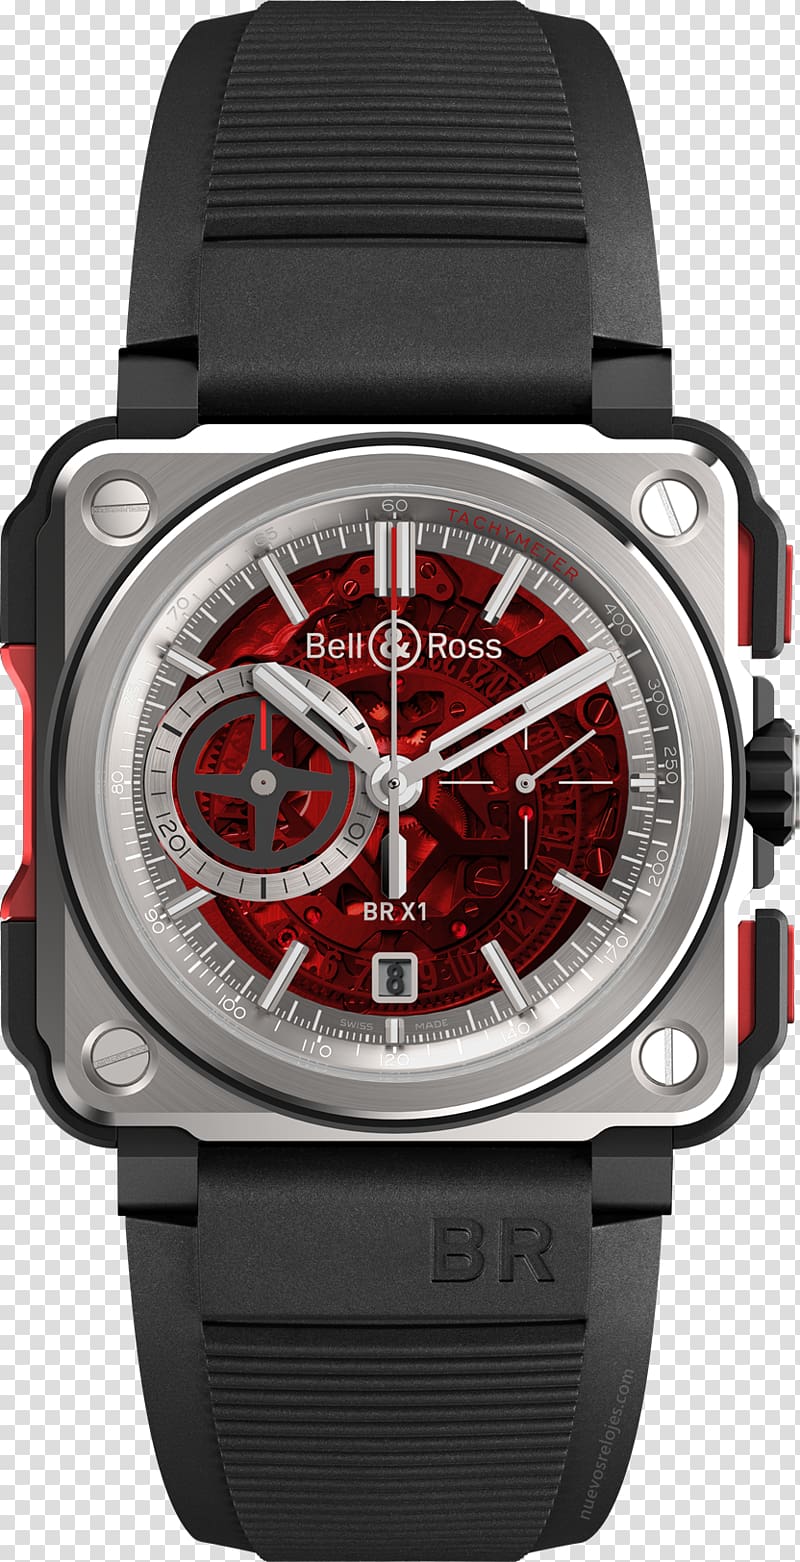 Chronograph Automatic watch Bell & Ross, Inc., watch transparent background PNG clipart